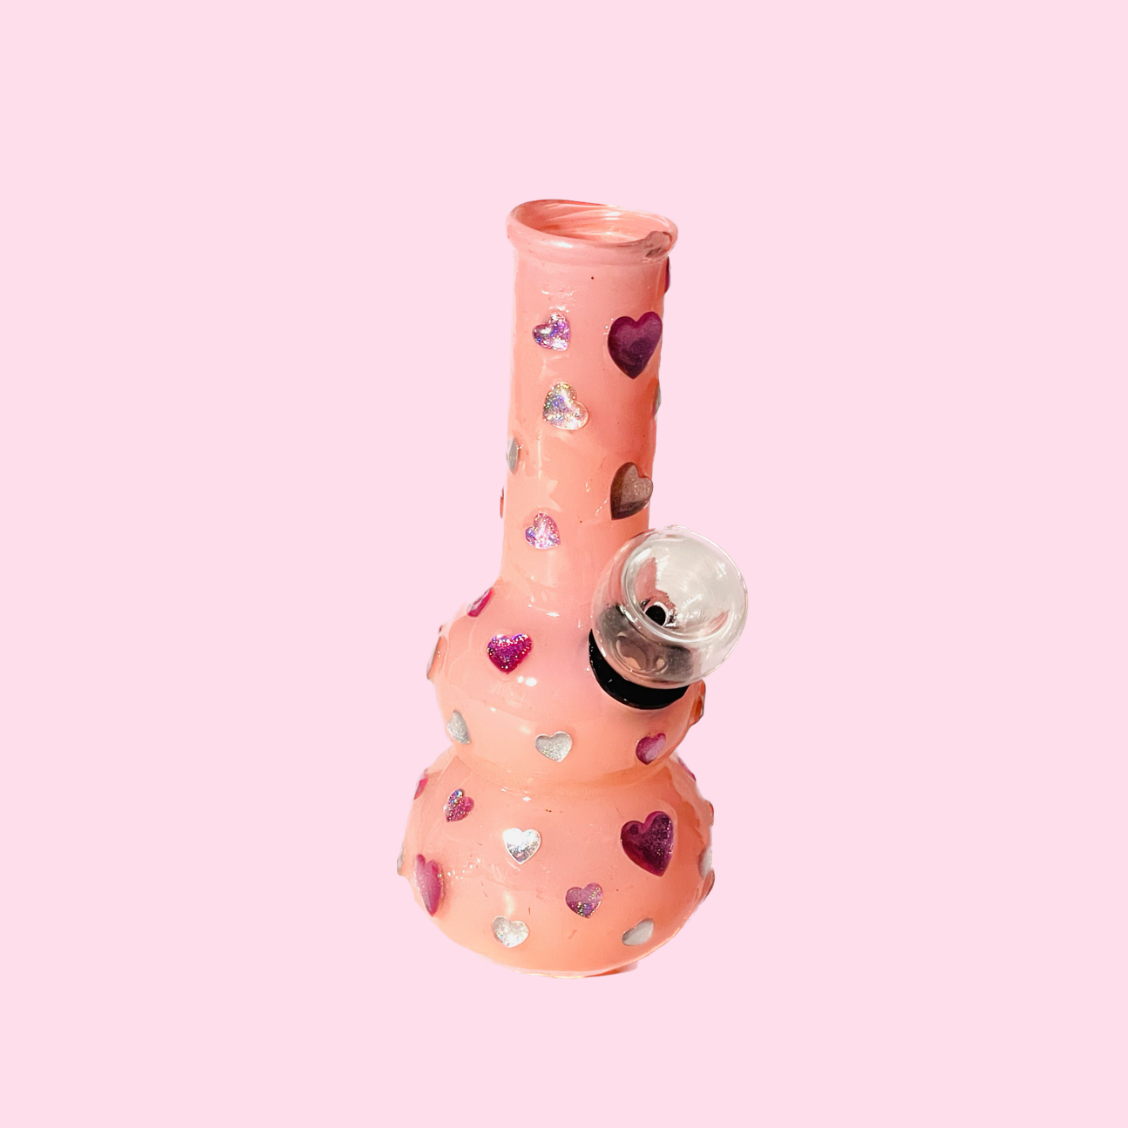 Candy Clouds Hand Decorated pipe- 5" Pretty Peach Color with pink and silver hearts